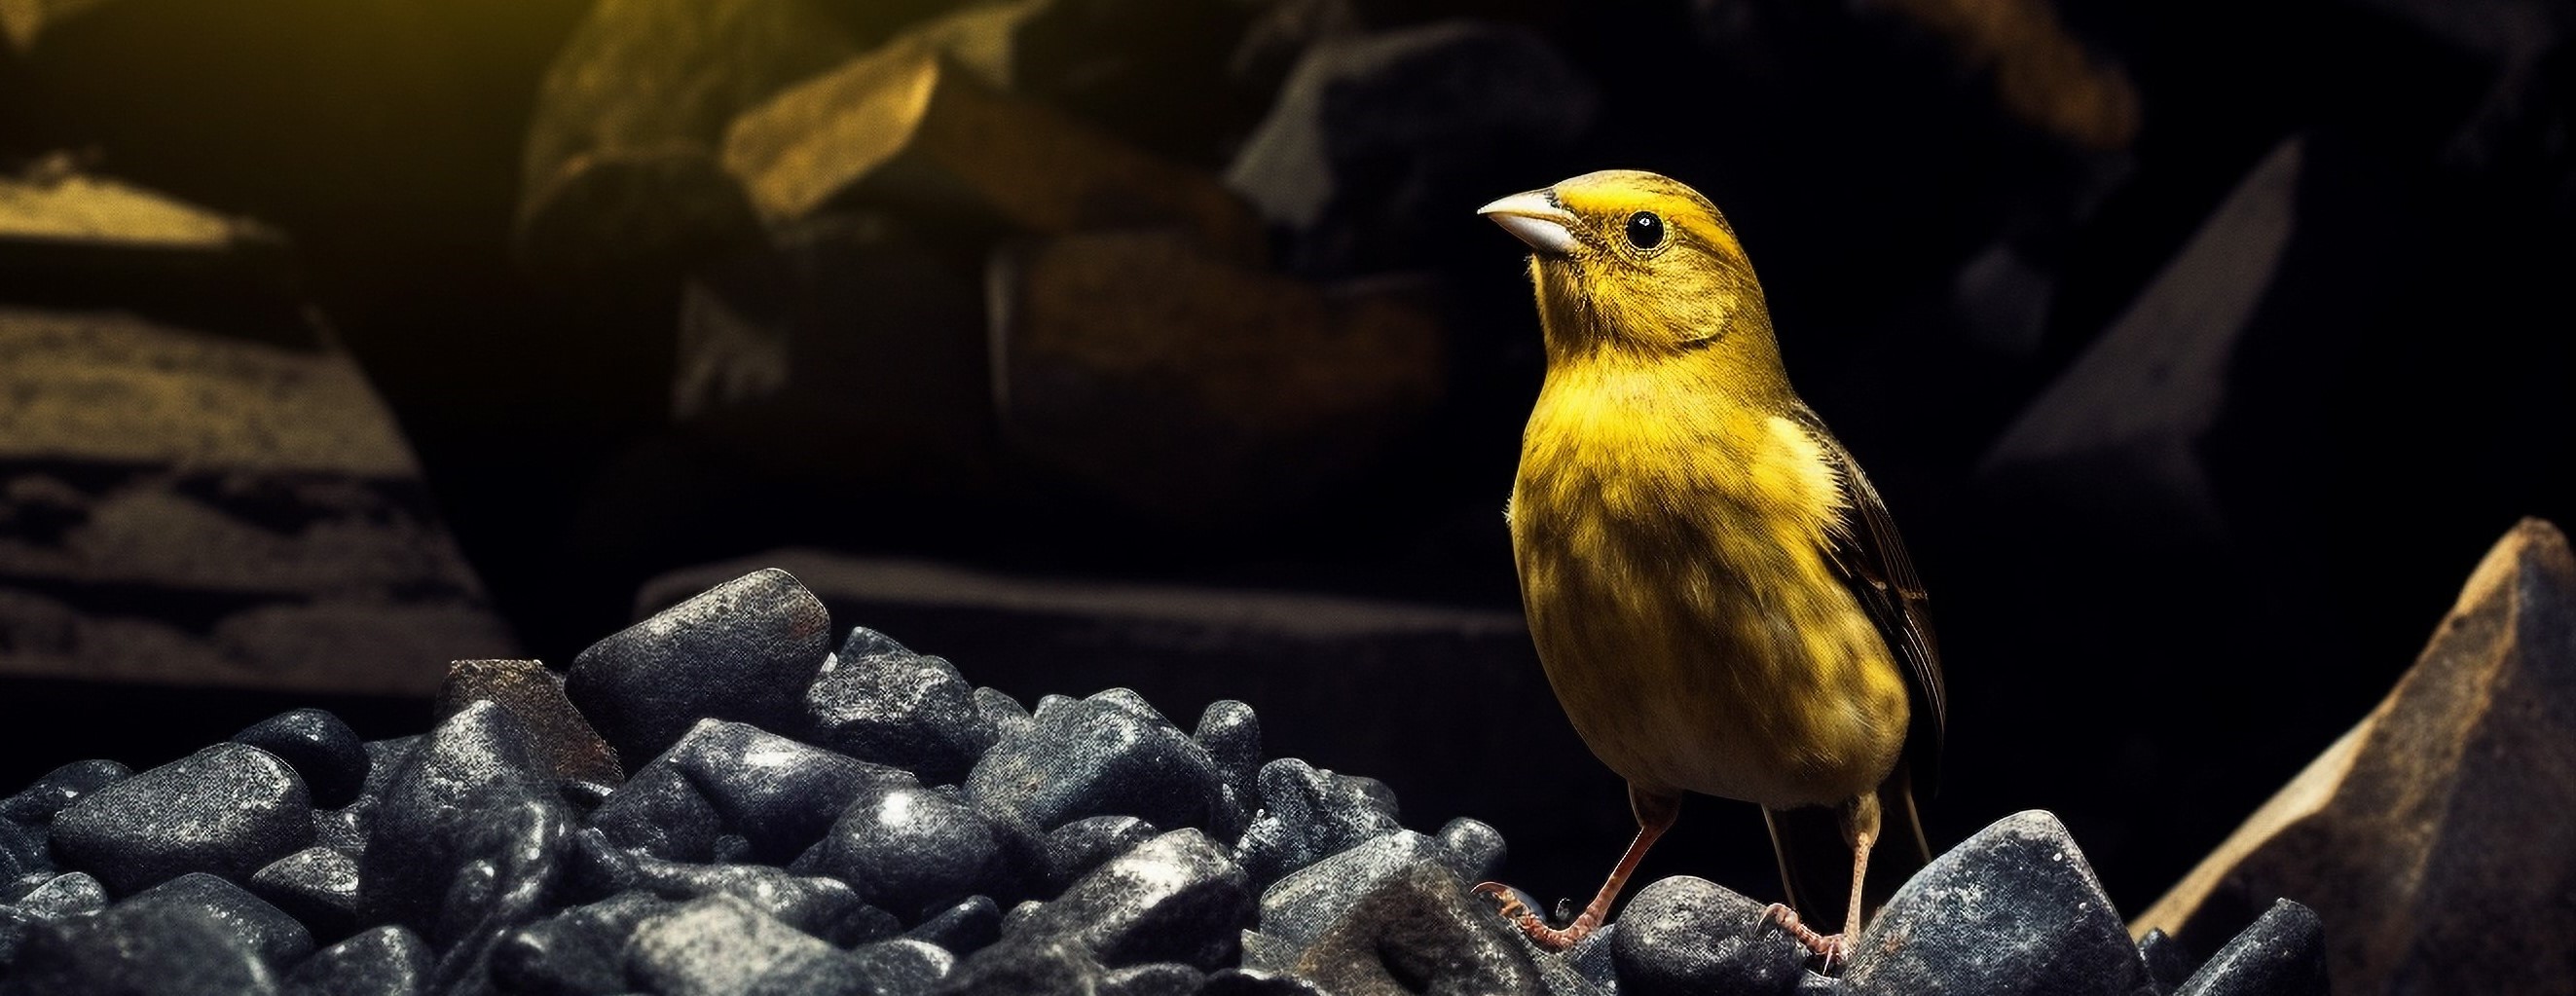 Adobe AI-generated stock image showing a canary perched amongst some lumps of coal set against a background suggesting a coal mine